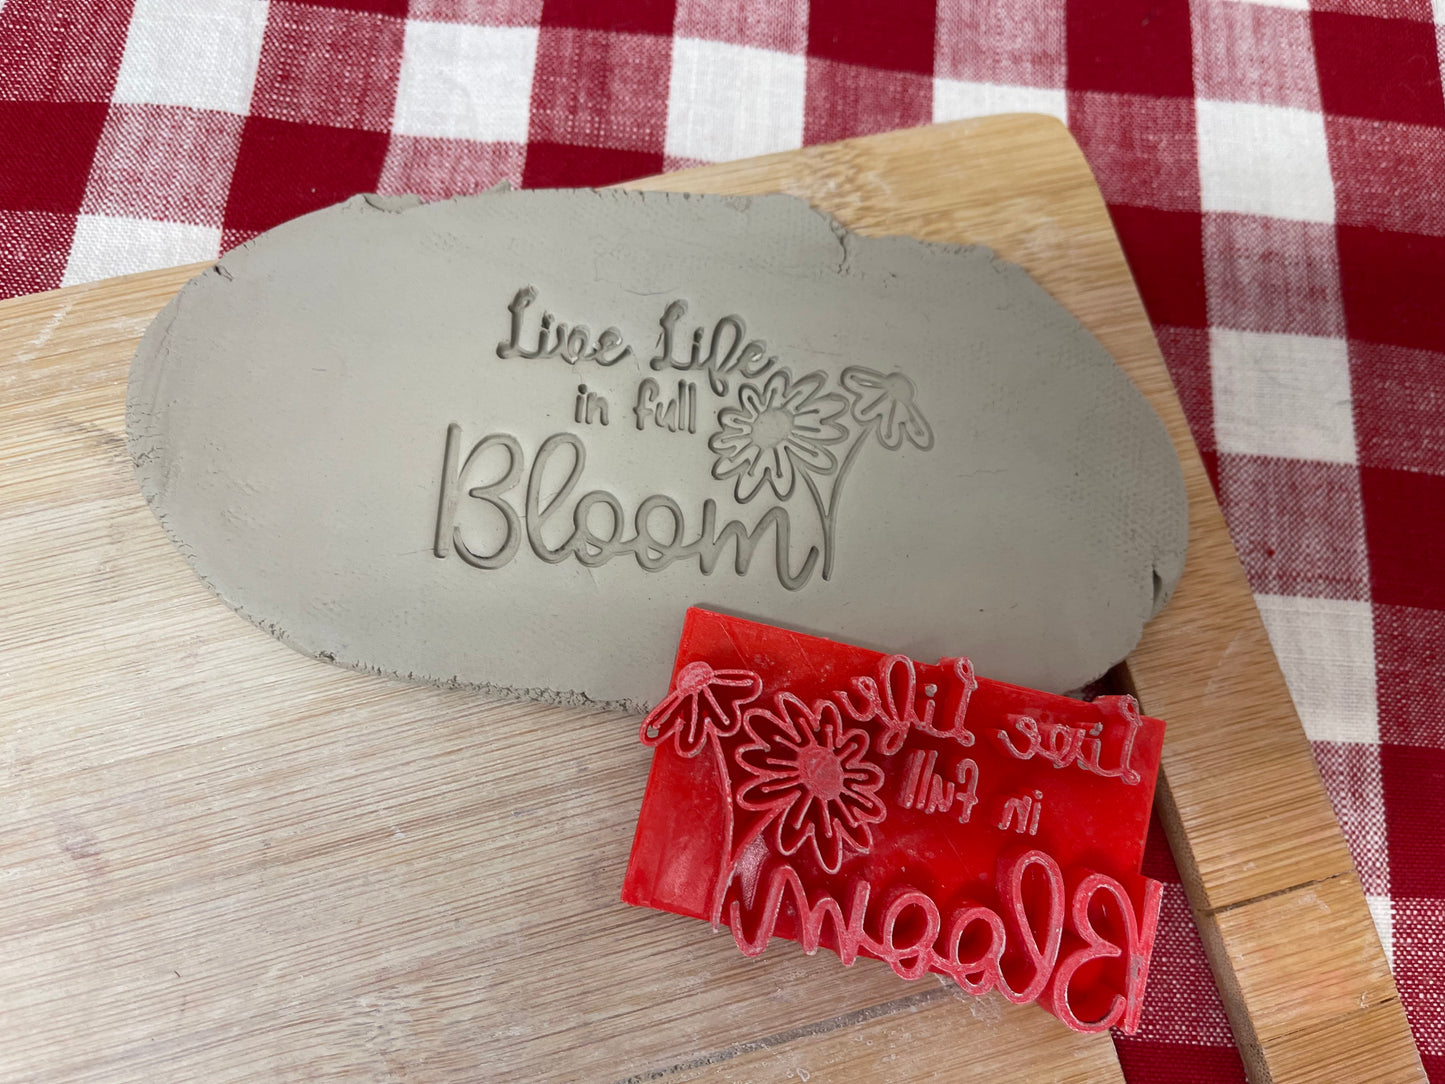 Live Life in Full Bloom Stamp, words with flowers design - from the February 2023 mystery box, plastic 3D printed